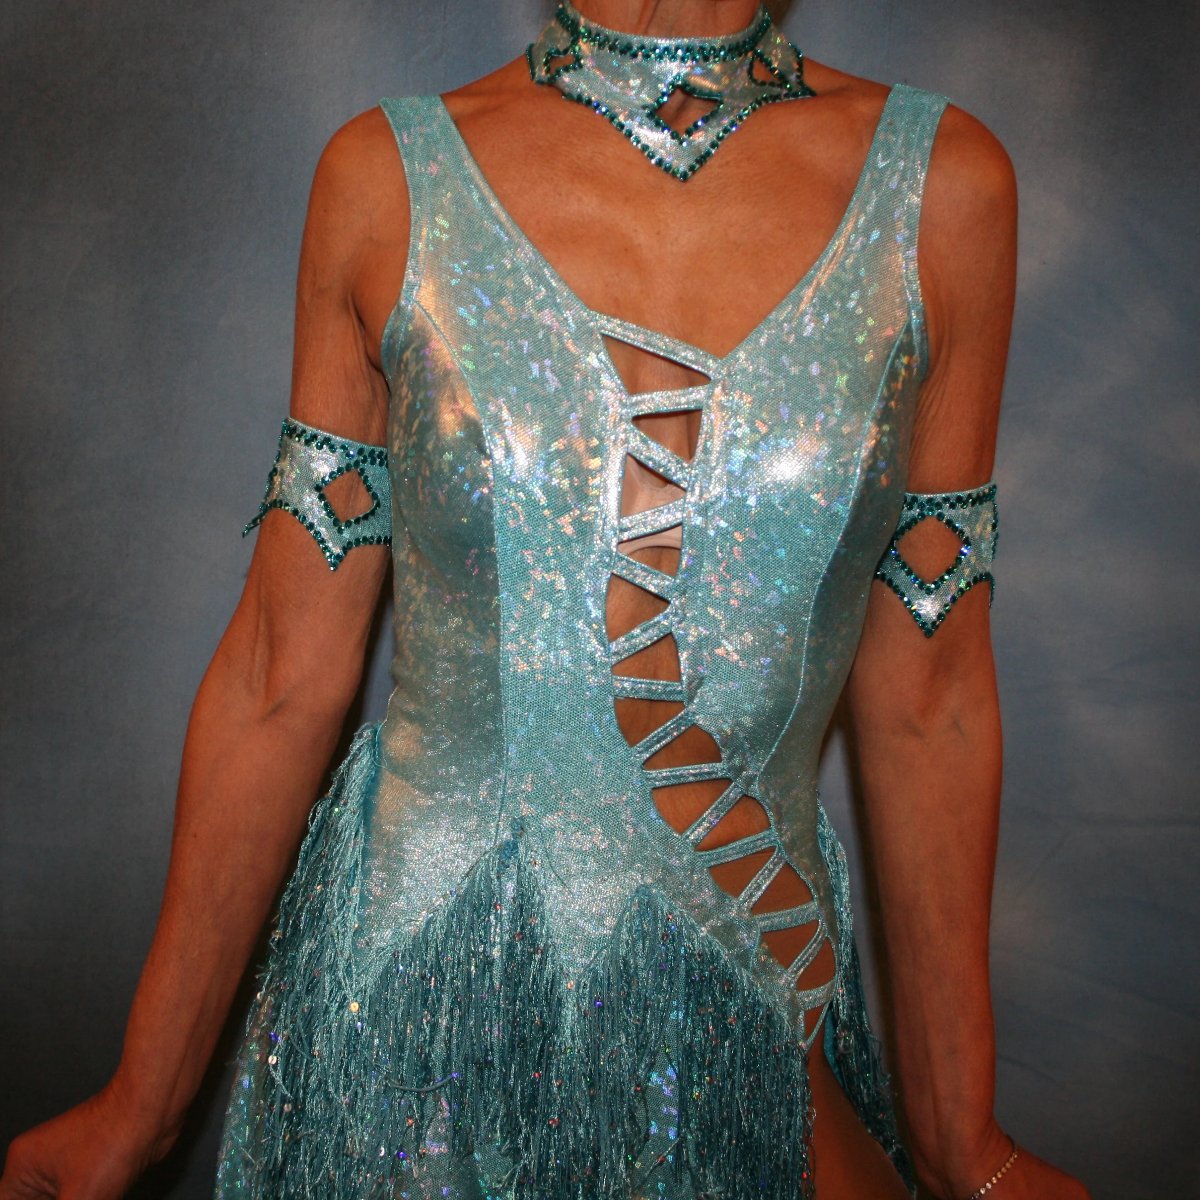 Crystal's Creations close up view of Light turquoise Latin/rhythm dance dress created in turquoise hologram metallic lycra with hologram sequined fringe, is embellished with blue zircon Swarovski rhinestones, & features cutout detailing.